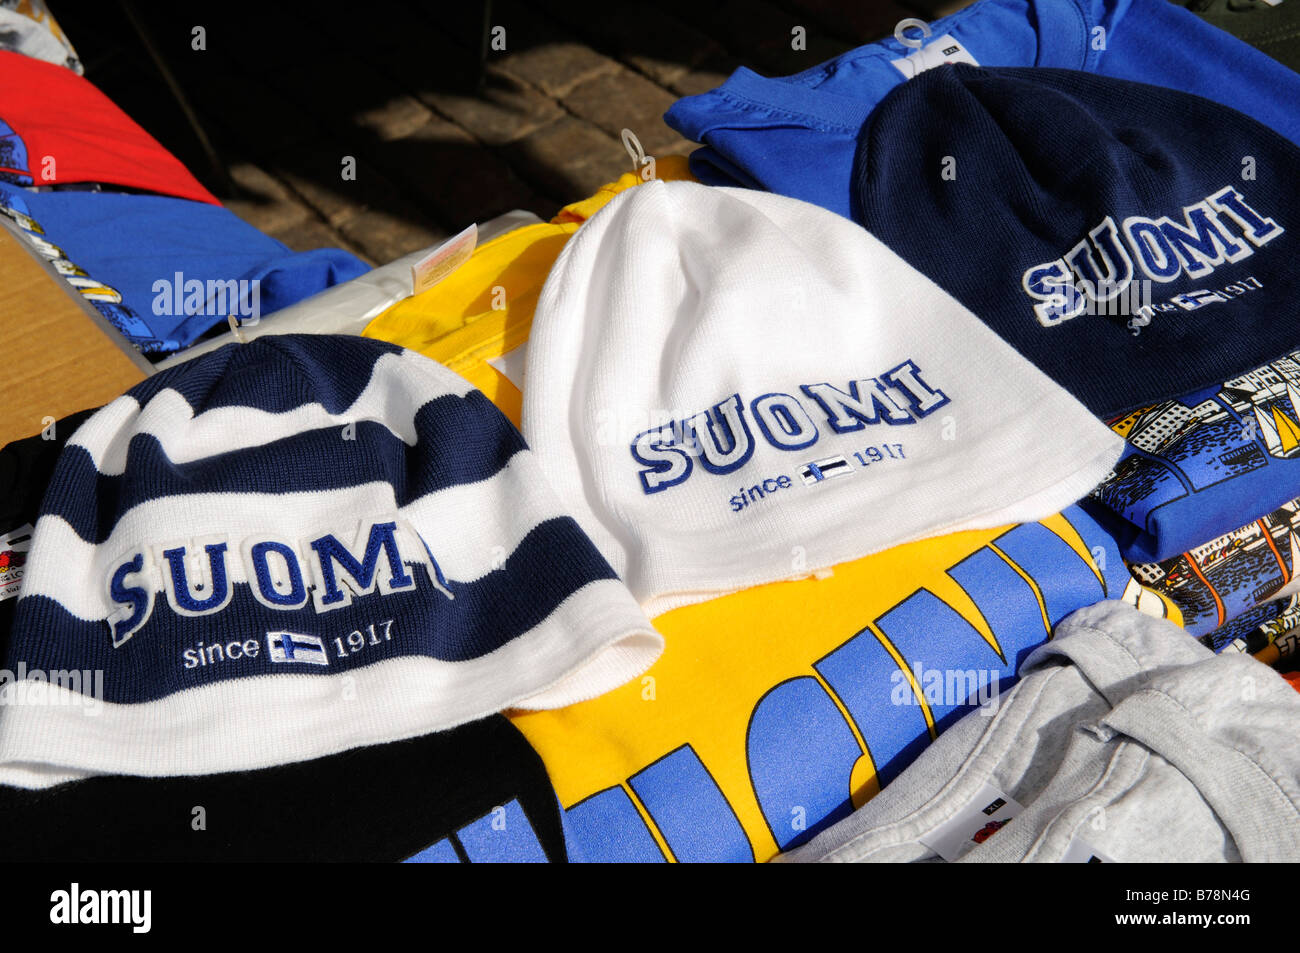 Caps with a Suomi label at a market, Esplanade, Helsinki, Finland, Europe Stock Photo